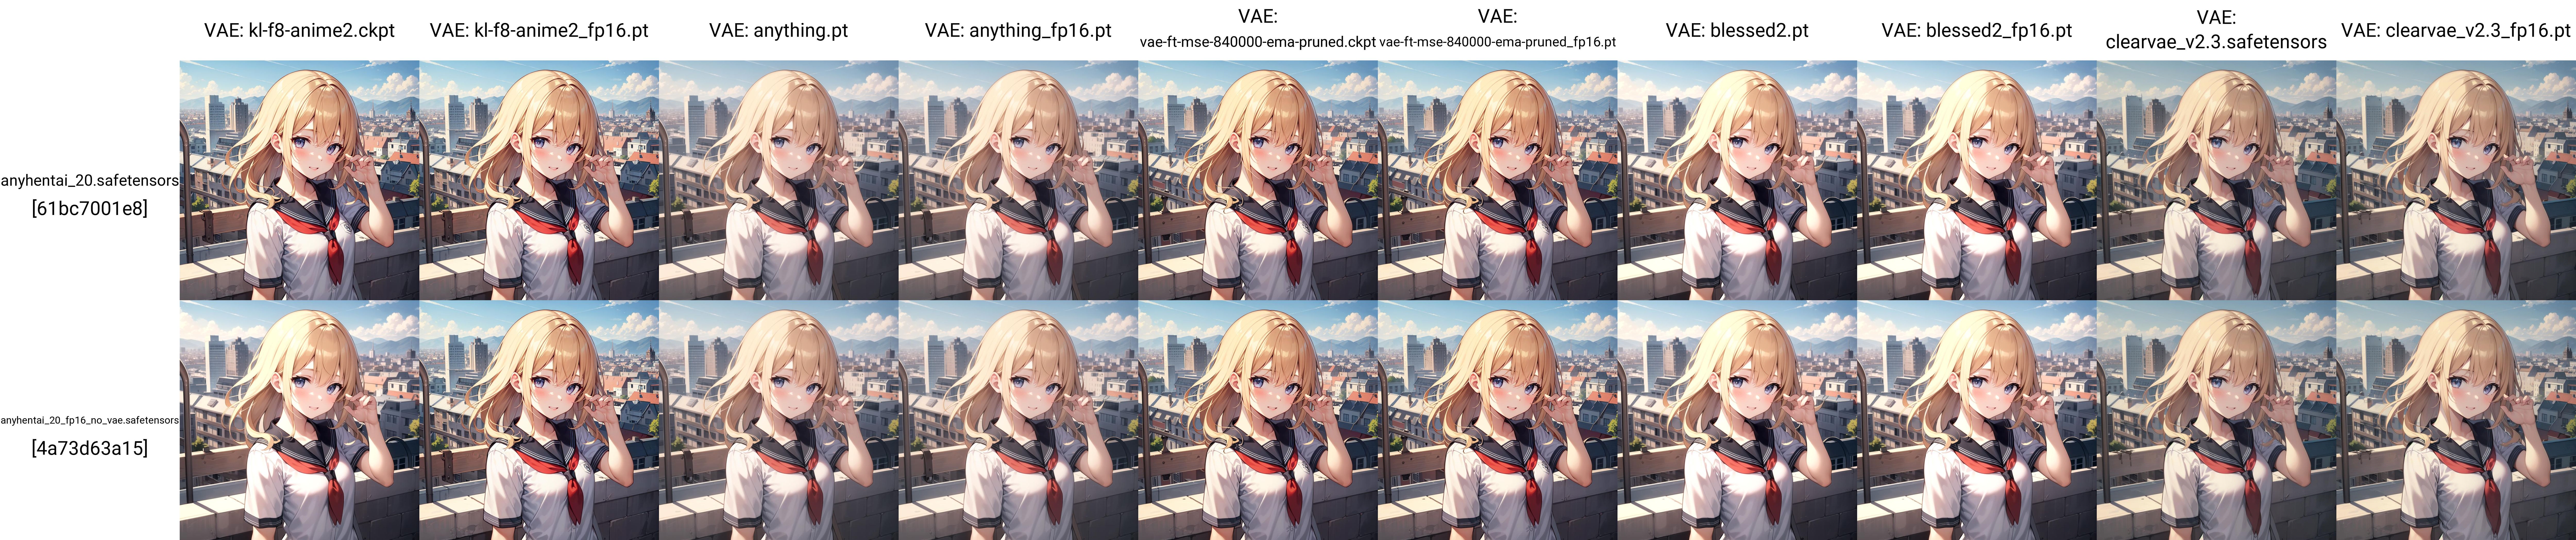 Anything / Kl-f8-anime2 / Vae-ft-mse-840000-ema-pruned / Blessed / ClearVAE (fp16/cleaned) image by fp16_guy